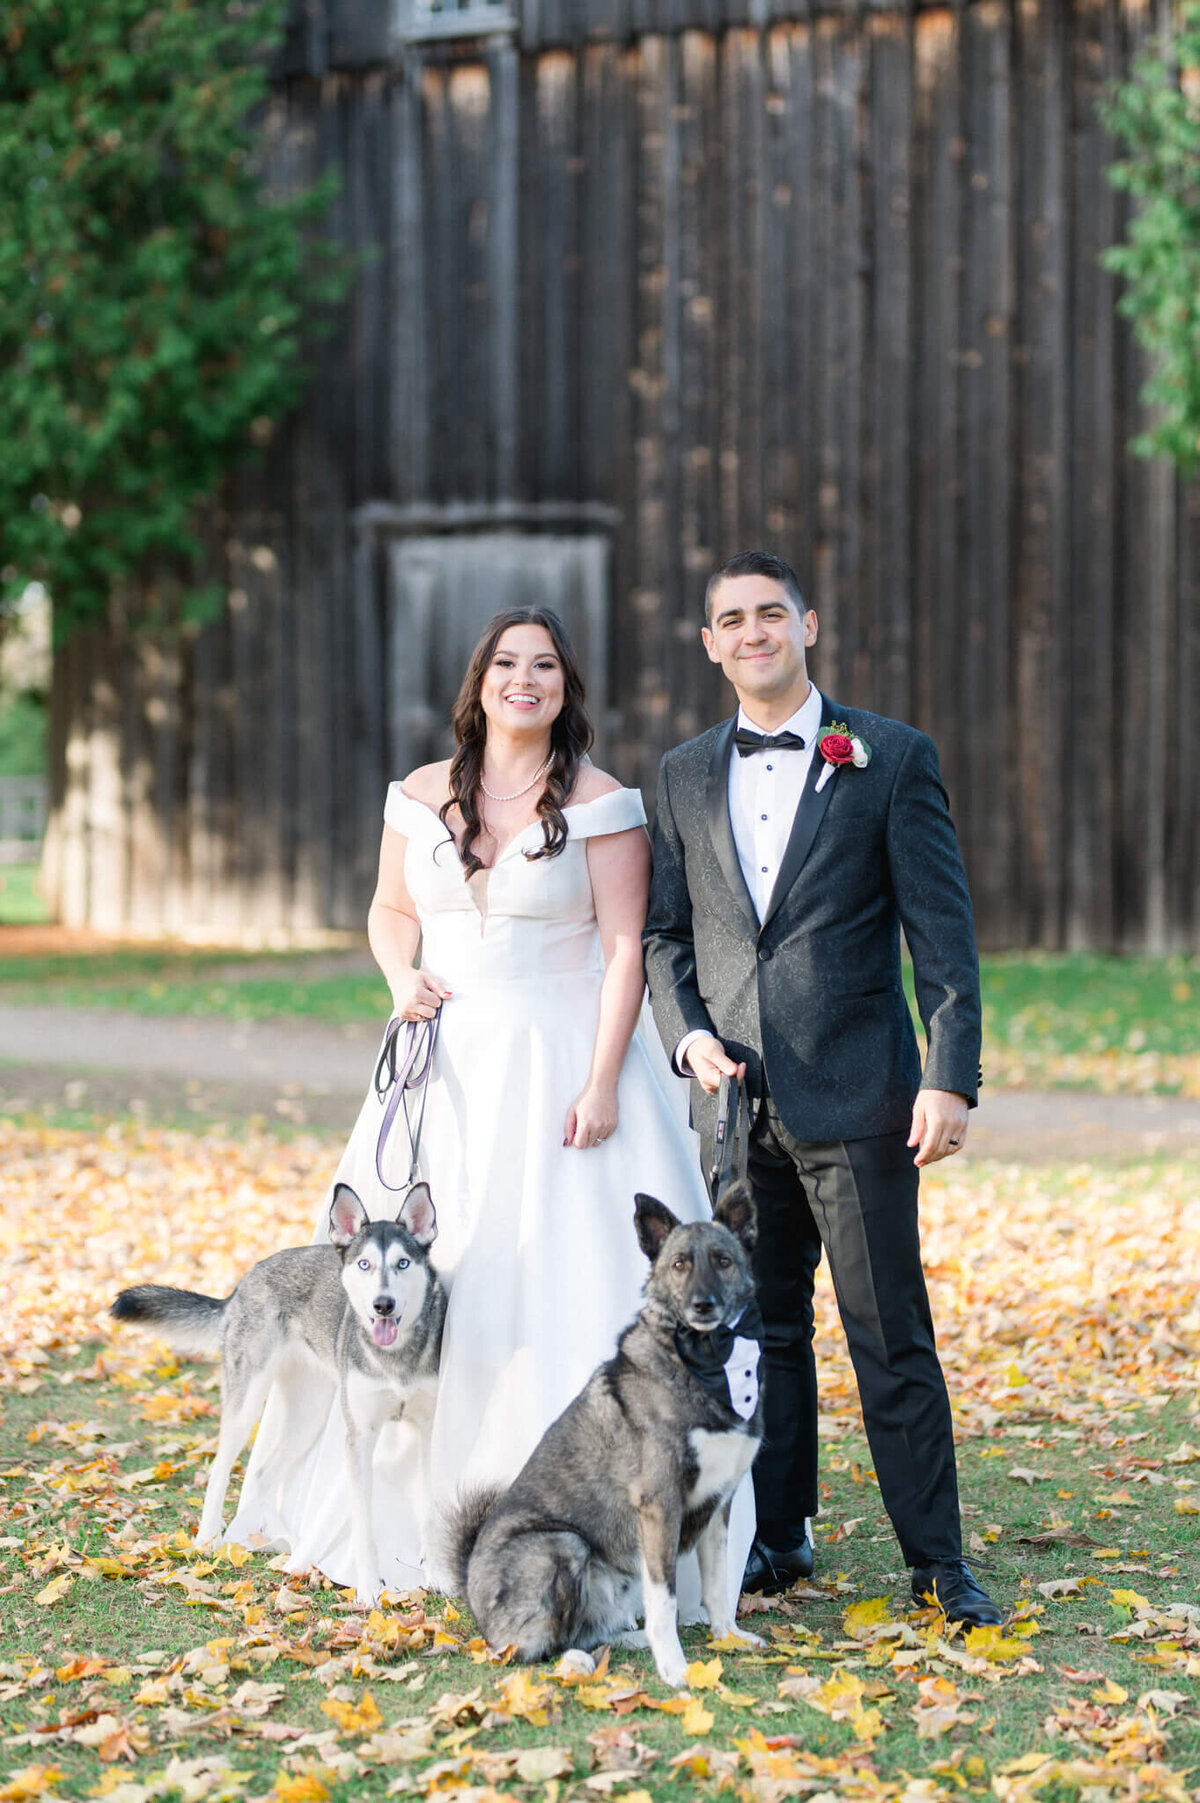 Bride and Groom take portraits with their pet dogs at Balls Falls. Captured by Niagara wedding photographer.